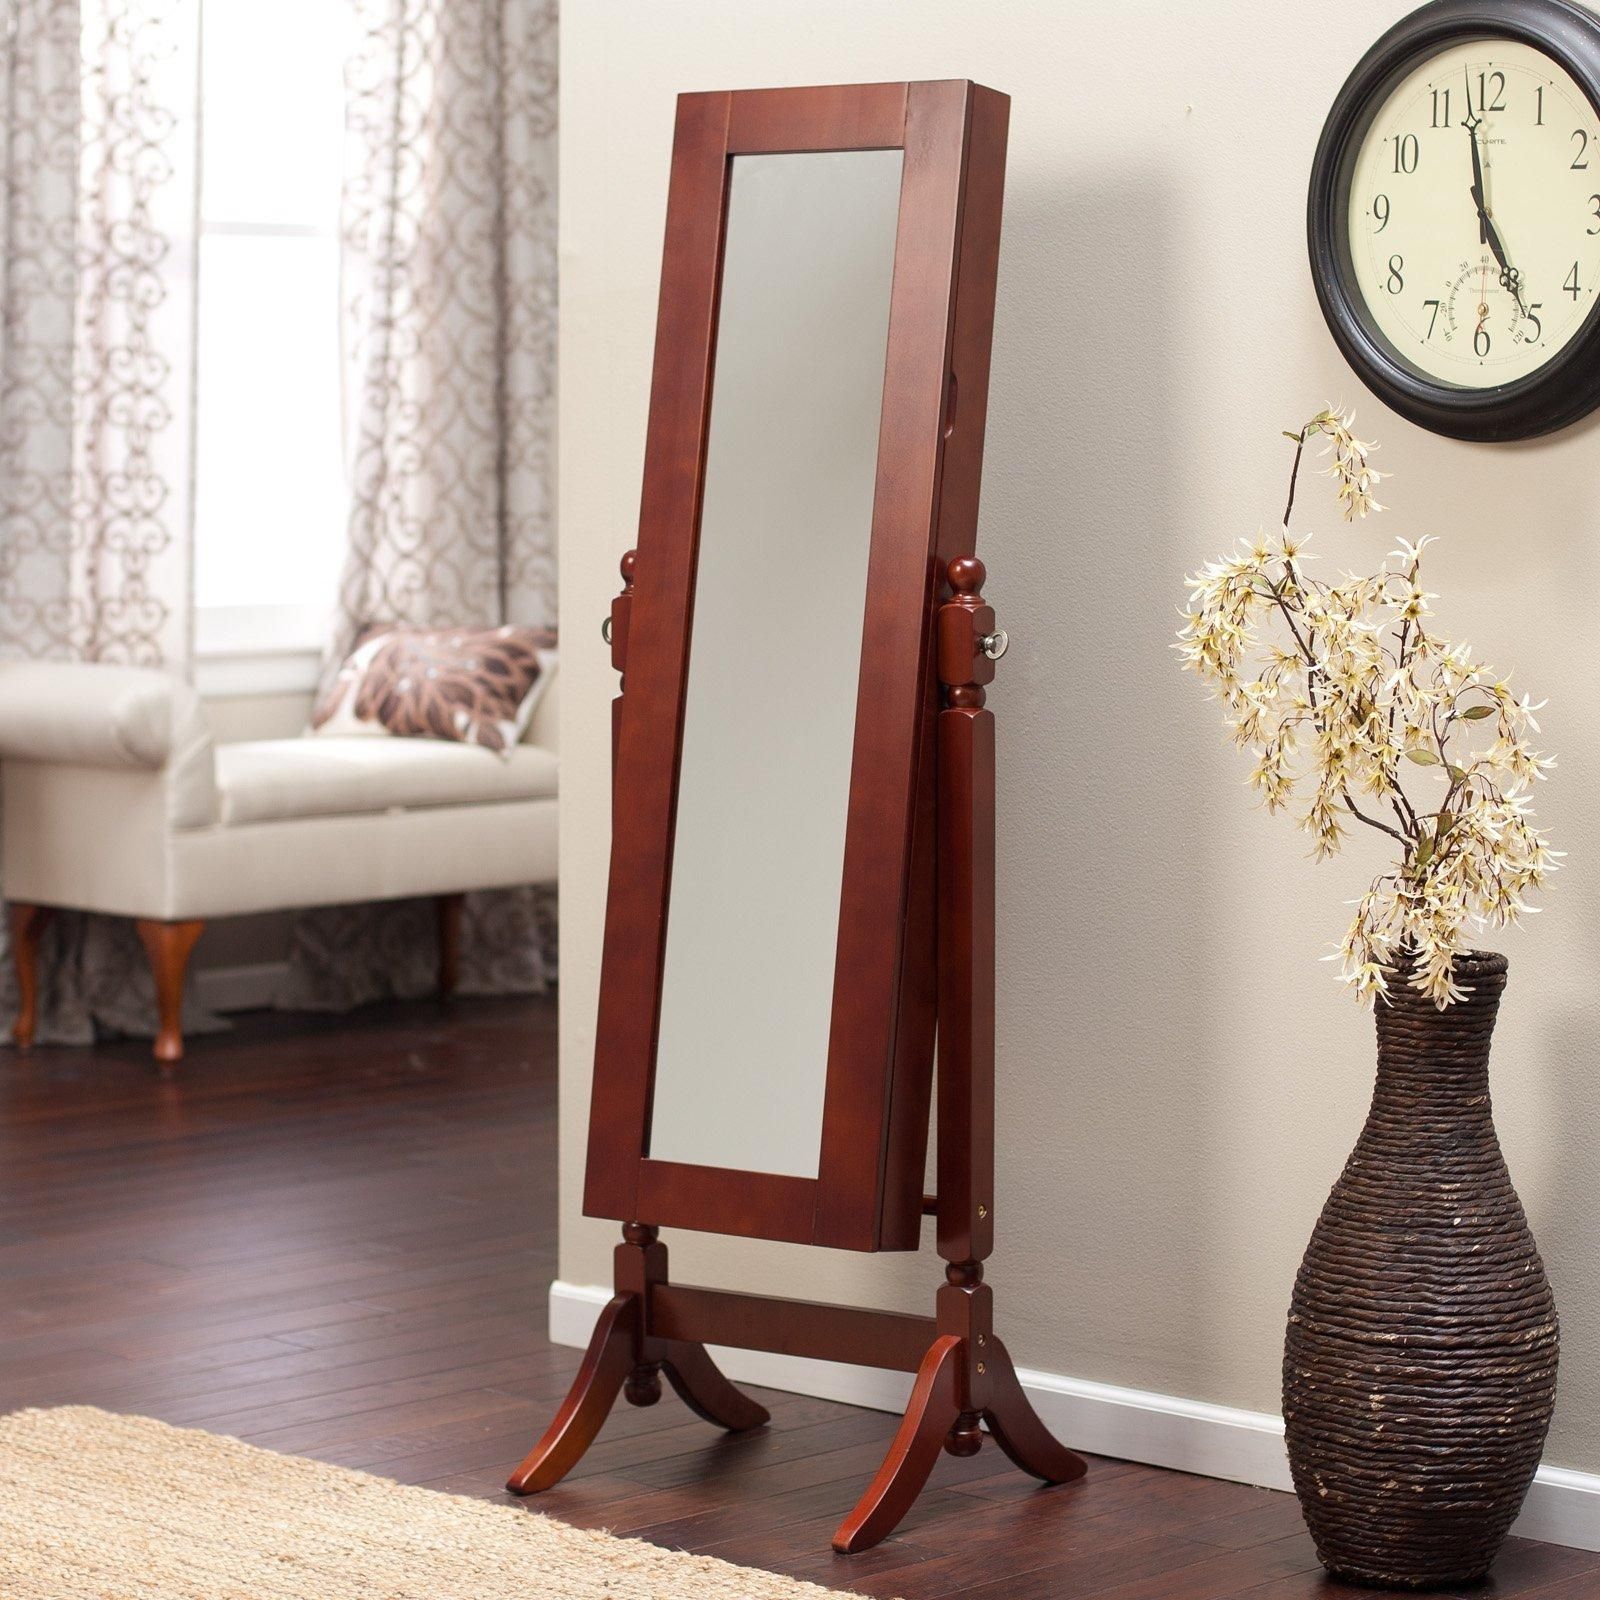 Bedroom Furniture Sets : Wooden Mirror Oversized Wall Mirrors With Small Gold Mirrors (View 20 of 20)